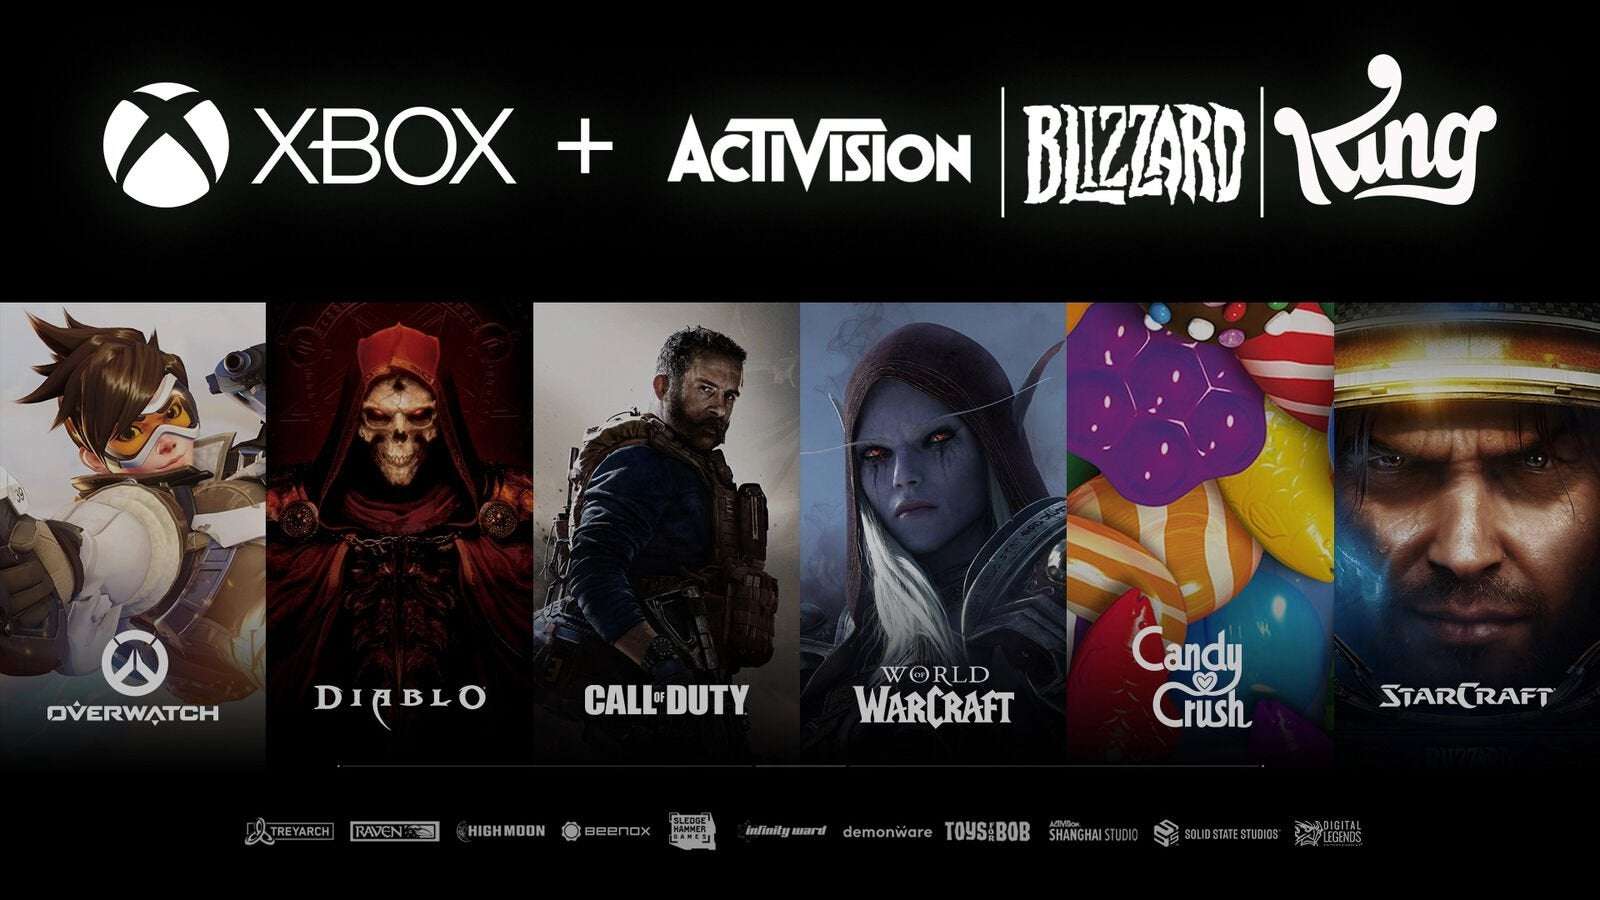 image for Microsoft claims FTC's lawsuit against Activision Blizzard buyout is unconstitutional